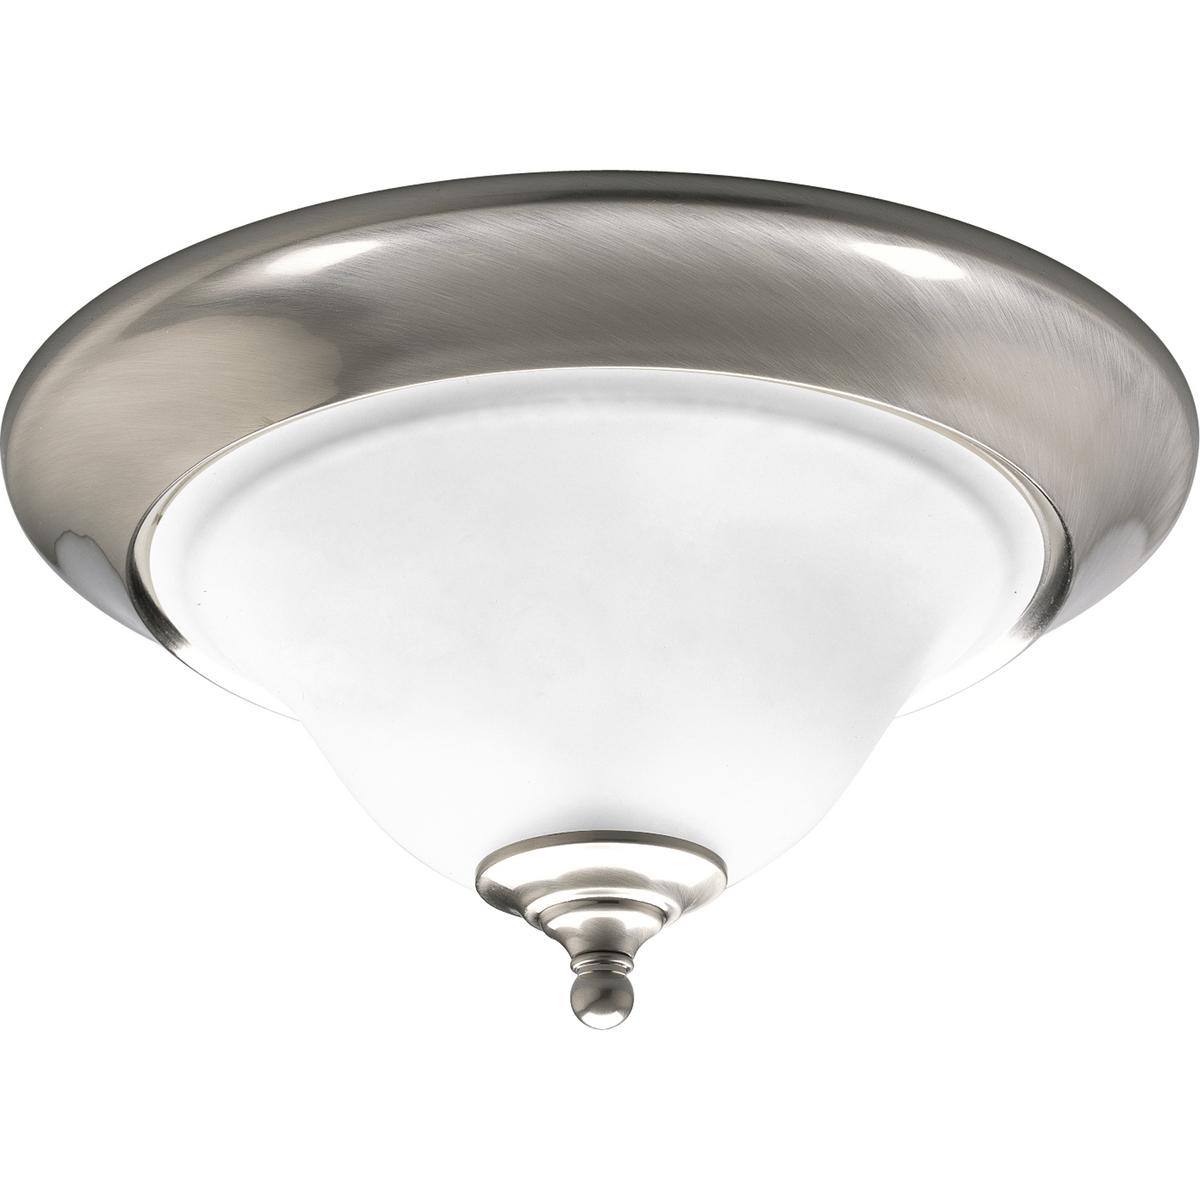 Hubbell P3476-09 Two-light close-to-ceiling fixture featuring soft angles, curving lines and etched glass shades. Gracefully exotic, the Trinity Collection offers classic sophistication for transitional interiors. Sculptural forms of metal and glass are enhanced by a clas